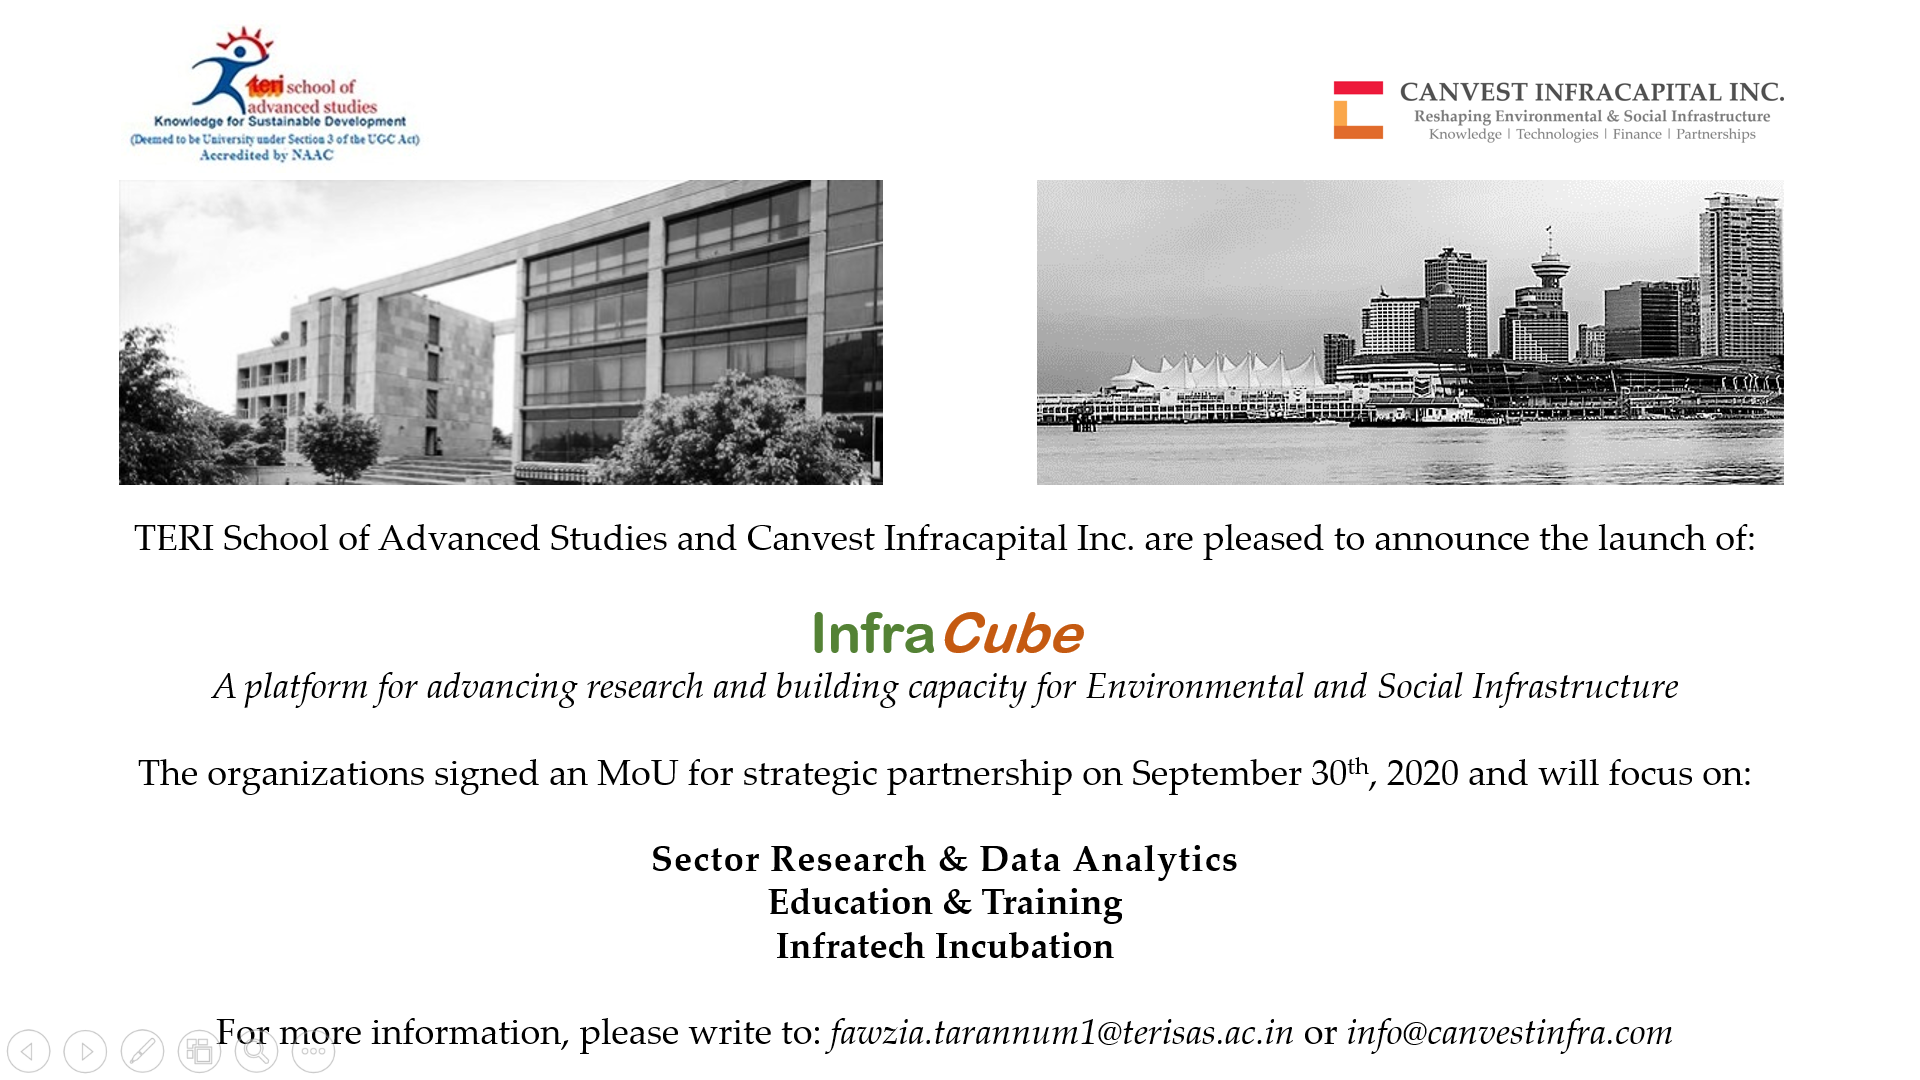 Canvest Infracapital and TERI School of Advanced Studies have signed an MoU to set up InfraCube, a platform for advancing infrastructure sector ...